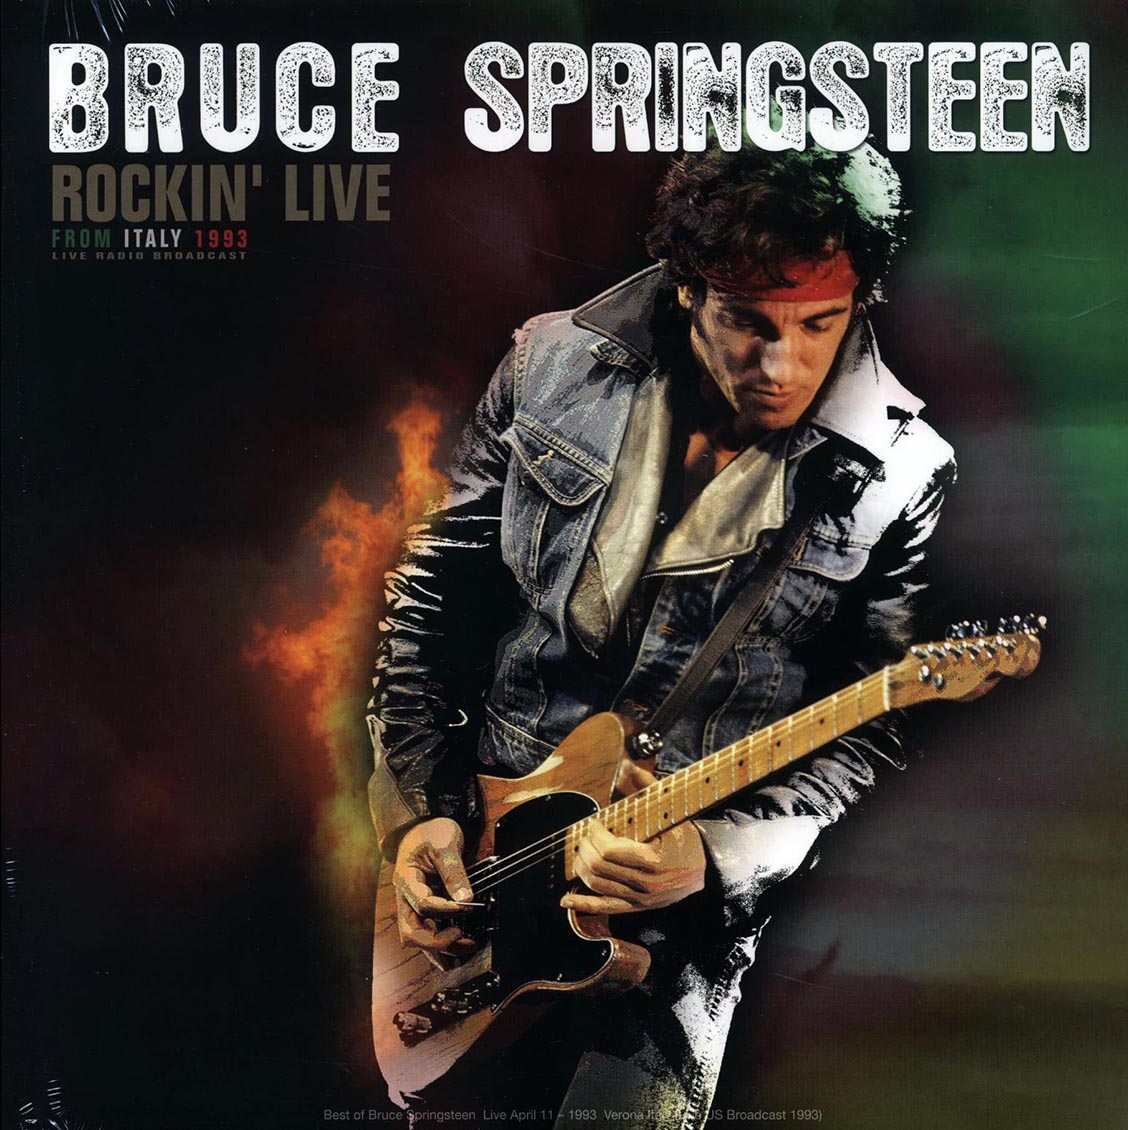 Bruce Springsteen - Rockin' Live From Italy 1993: Verona, April 11th